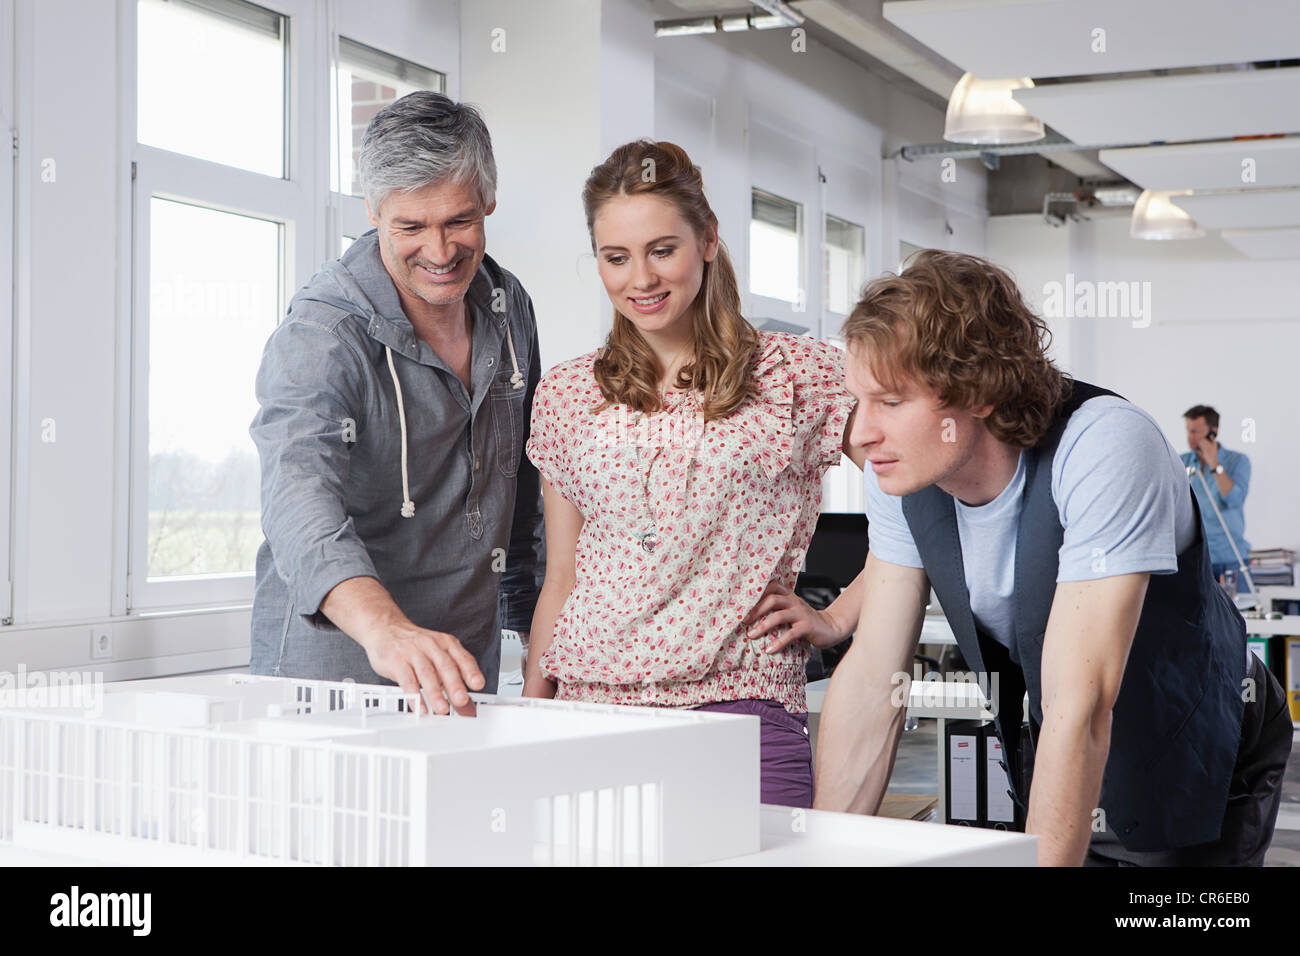 Germany, Bavaria, Munich, Man explaining architectural model to colleagues Stock Photo